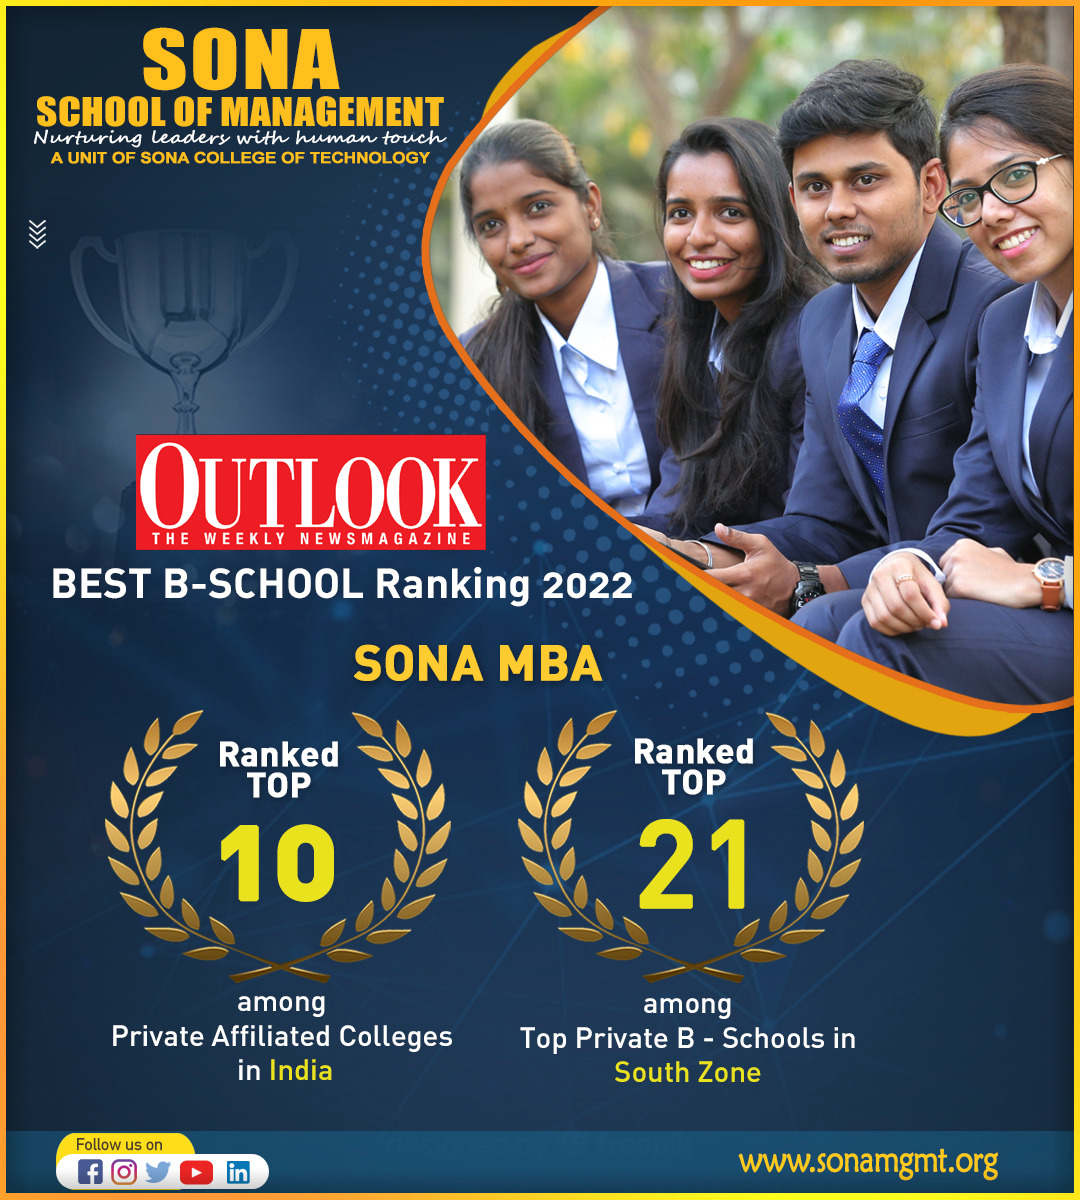 Sona School of Management, has been Ranked Top 21 among Top Private B Schools in South zone